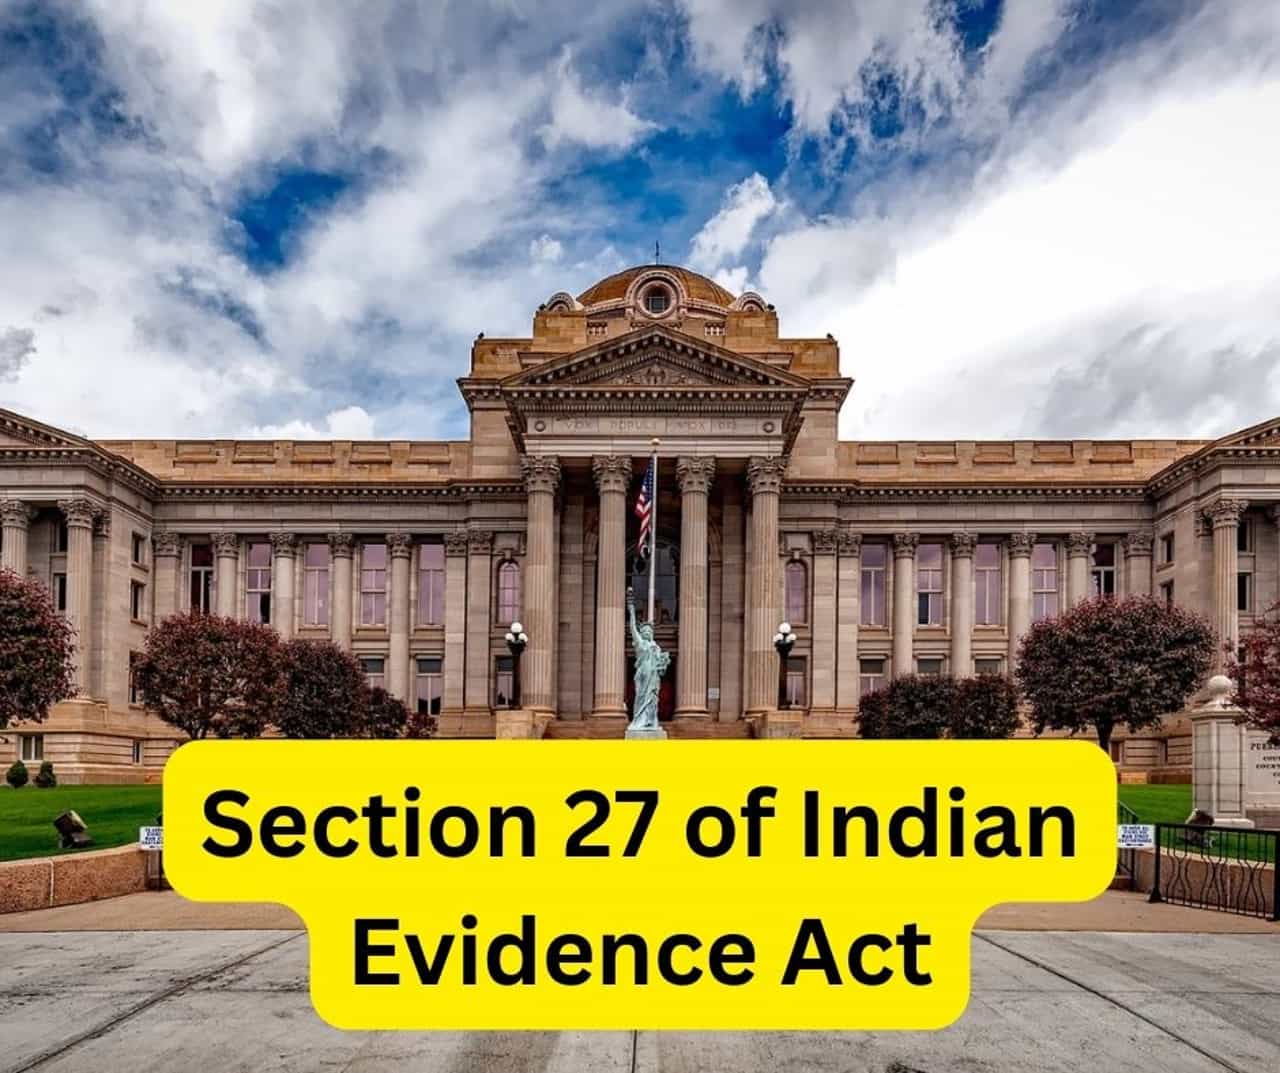 Section 27 of Indian Evidence Act